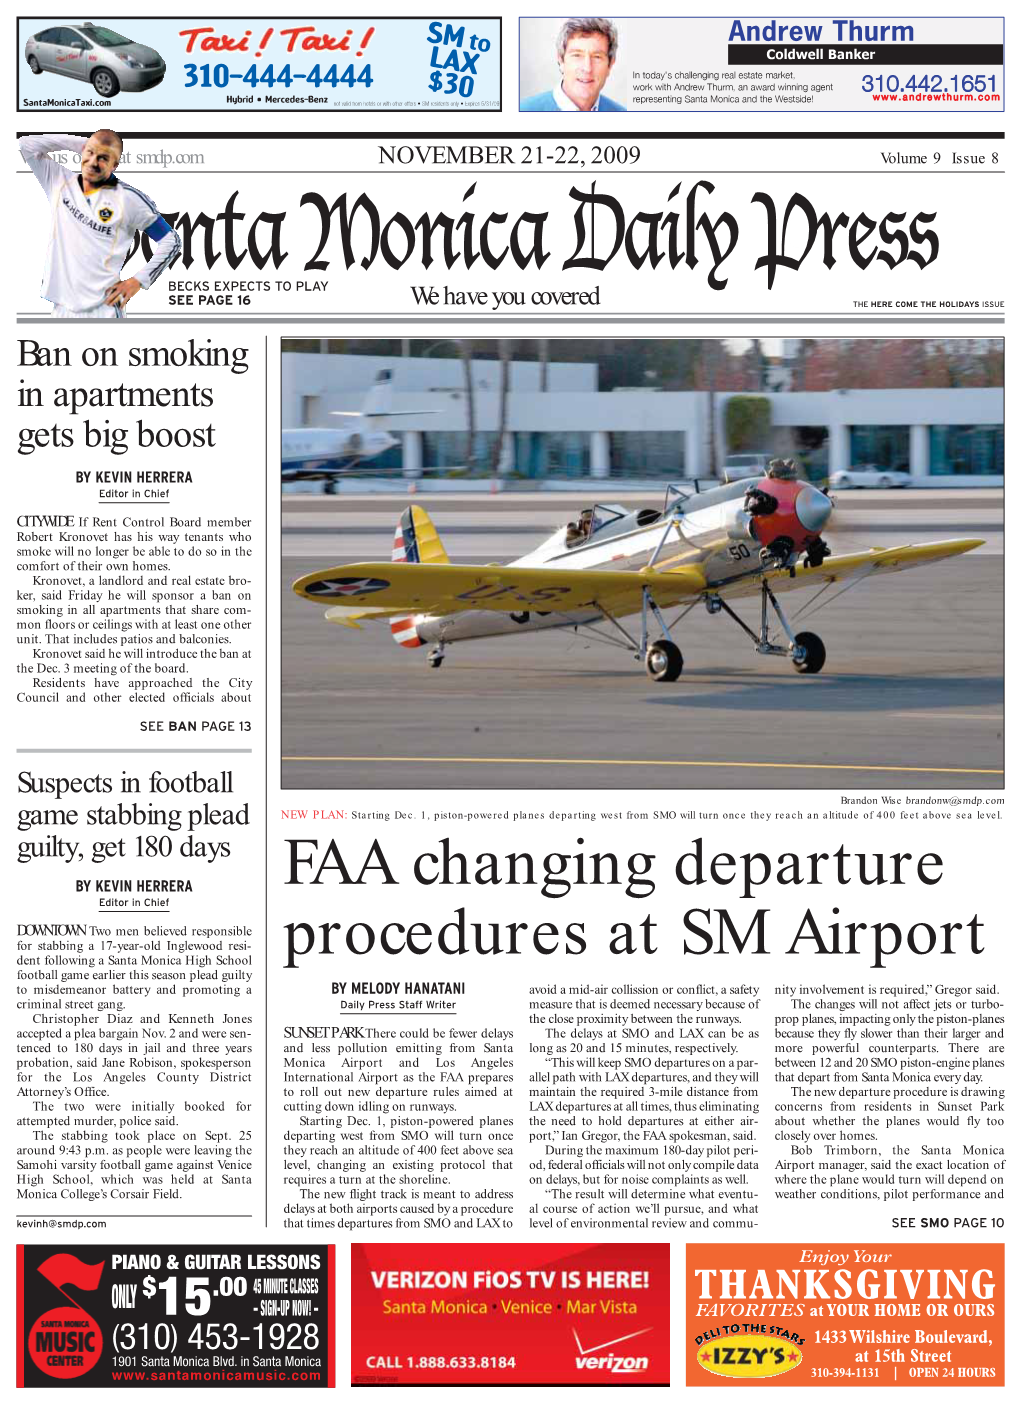 FAA Changing Departure Procedures at SM Airport